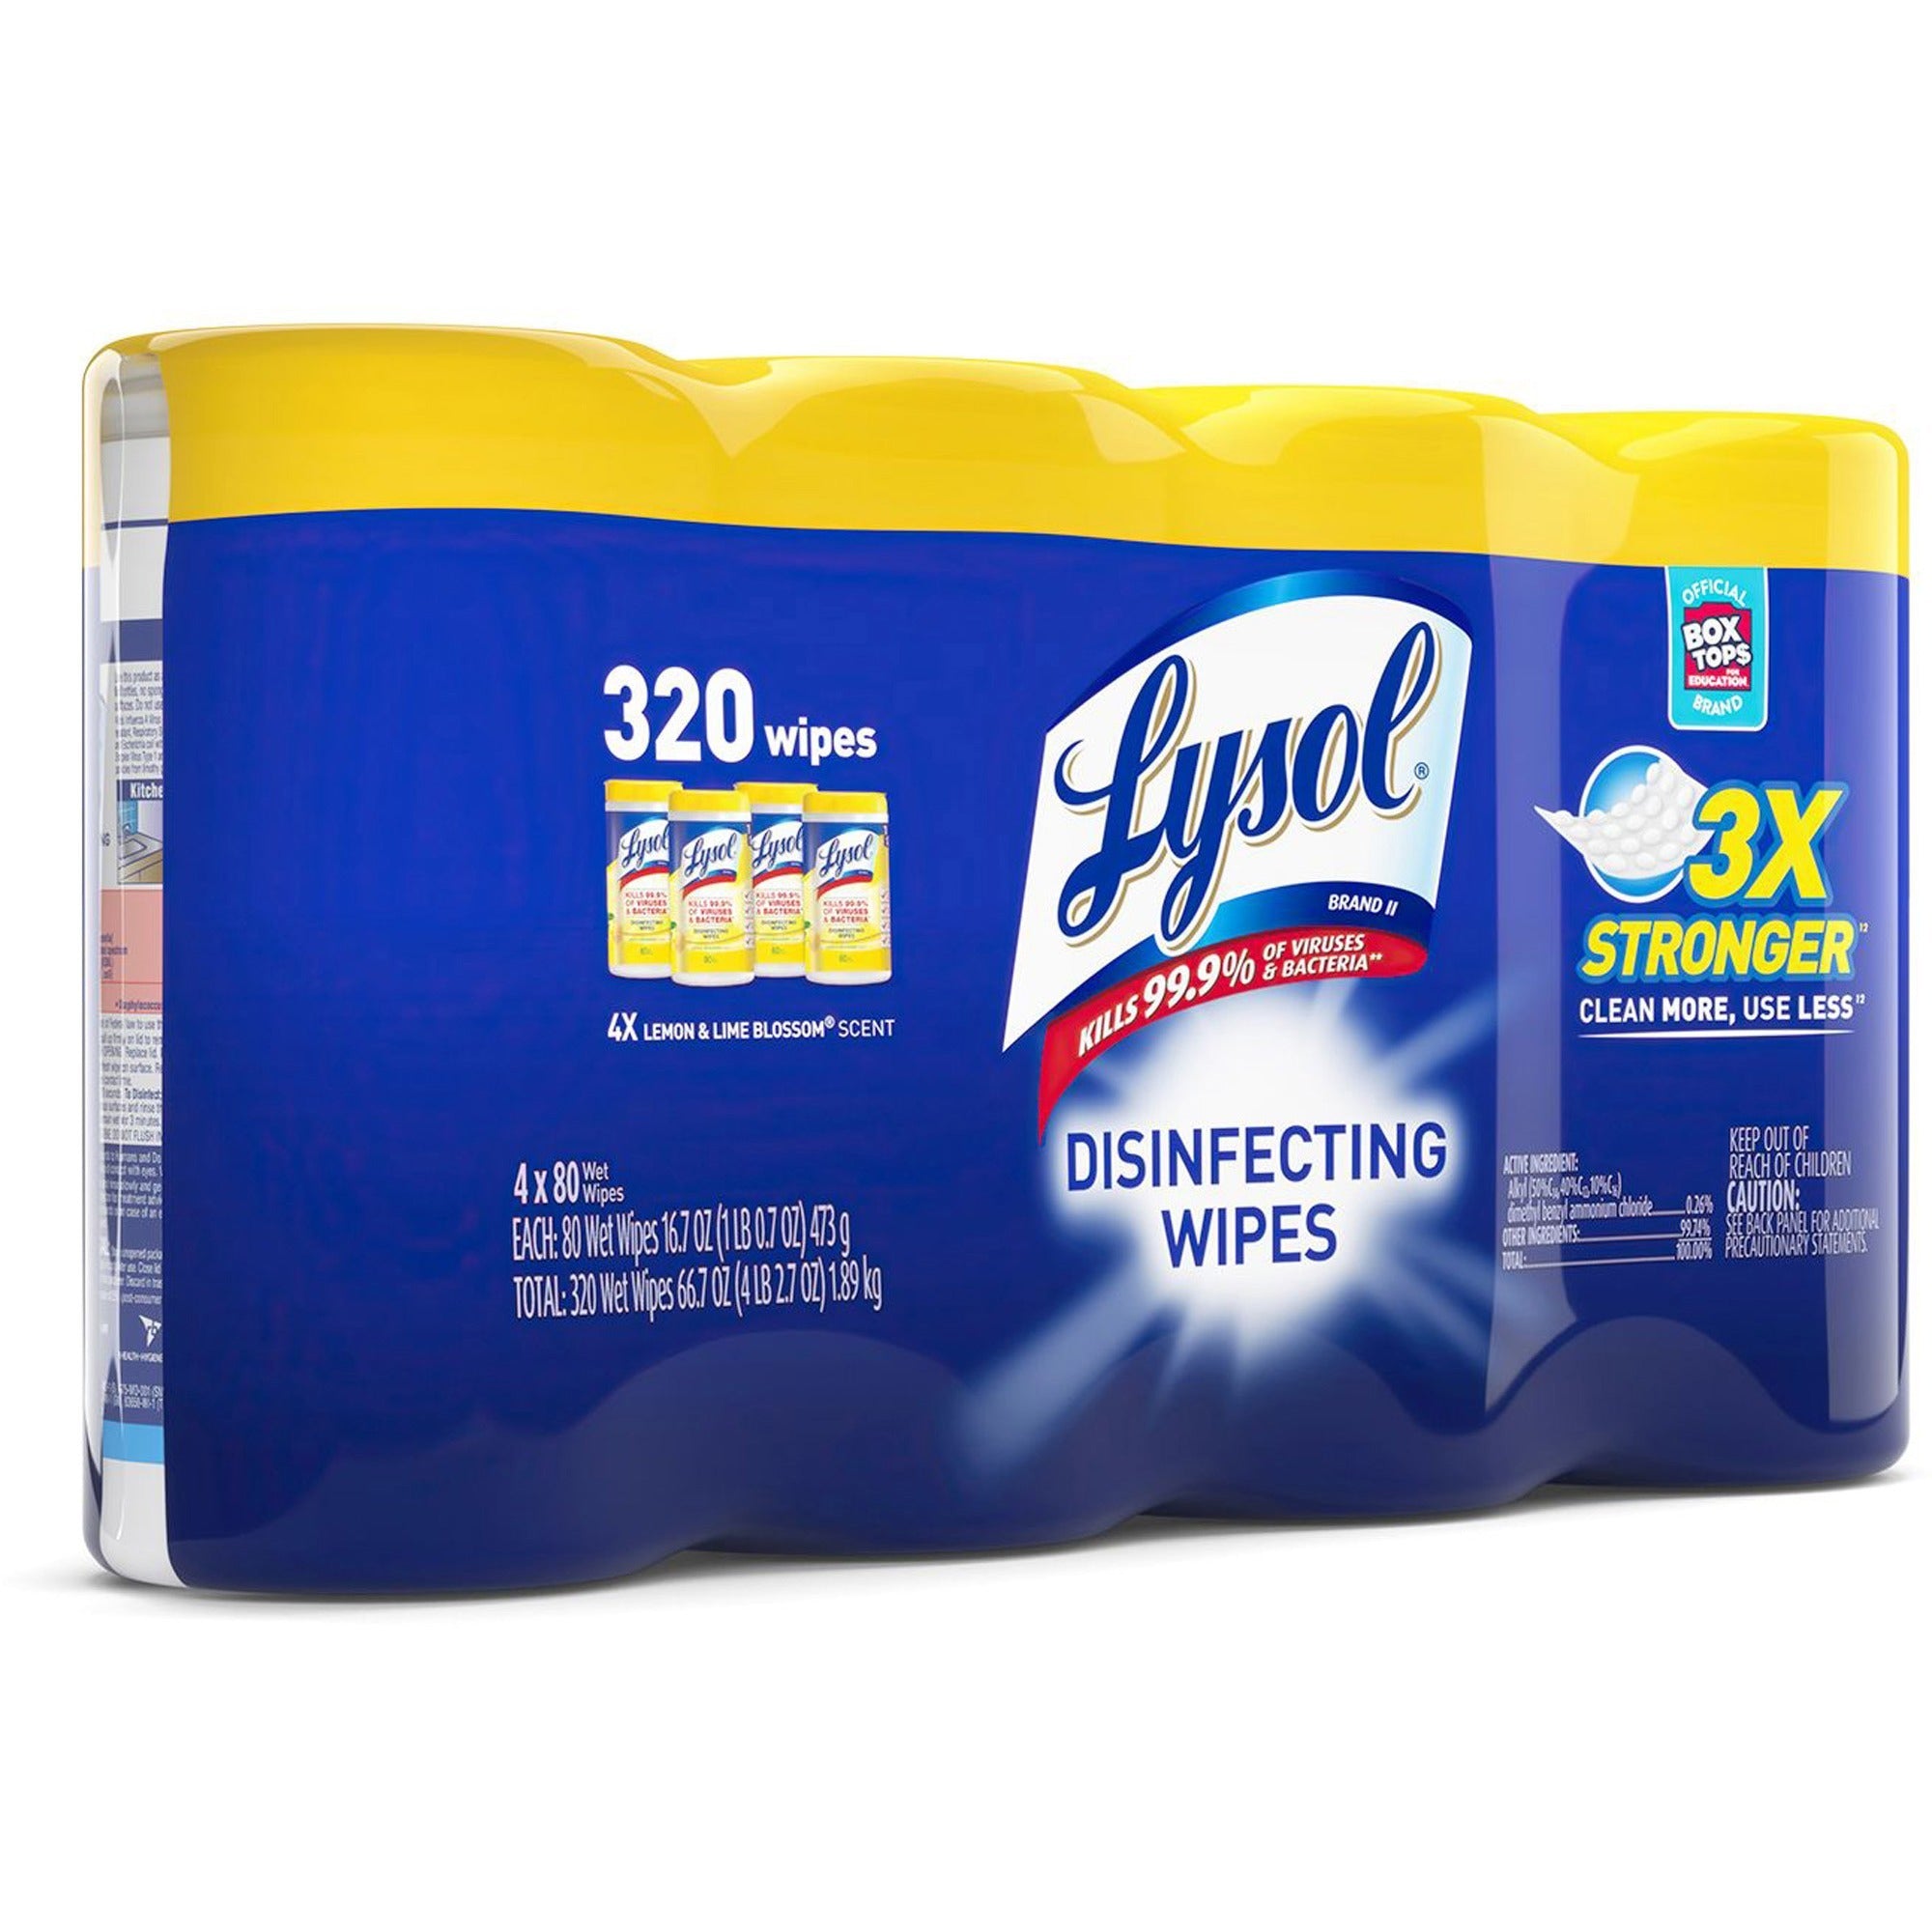 lysol-4-pack-disinfecting-wipes-lemon-lime-scent-800-canister-4-pack-pre-moistened-antibacterial-disinfectant-white_rac90641 - 3